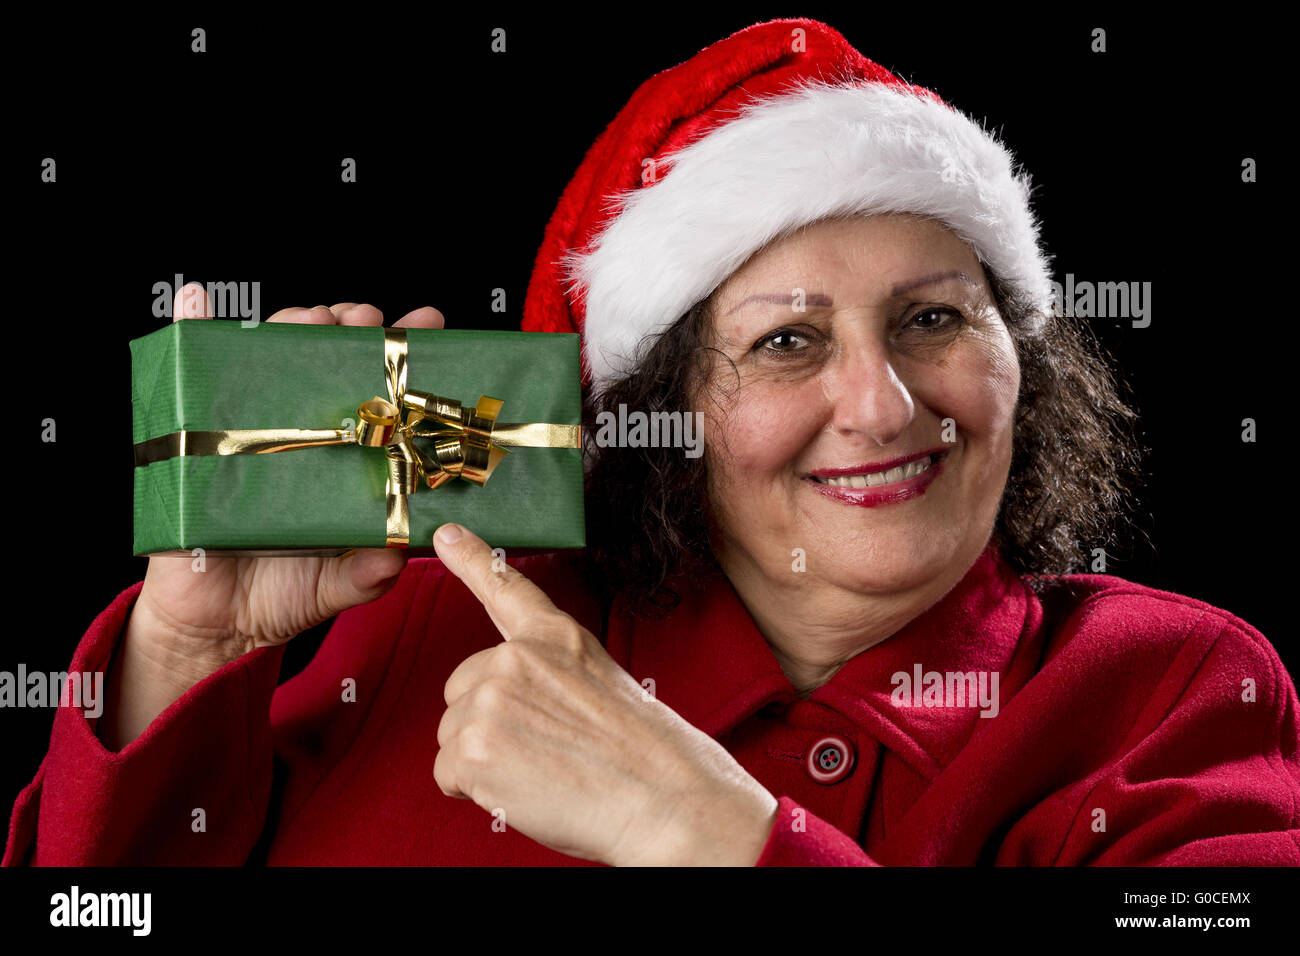 Female Senior Pointing at Green Wrapped Present Stock Photo